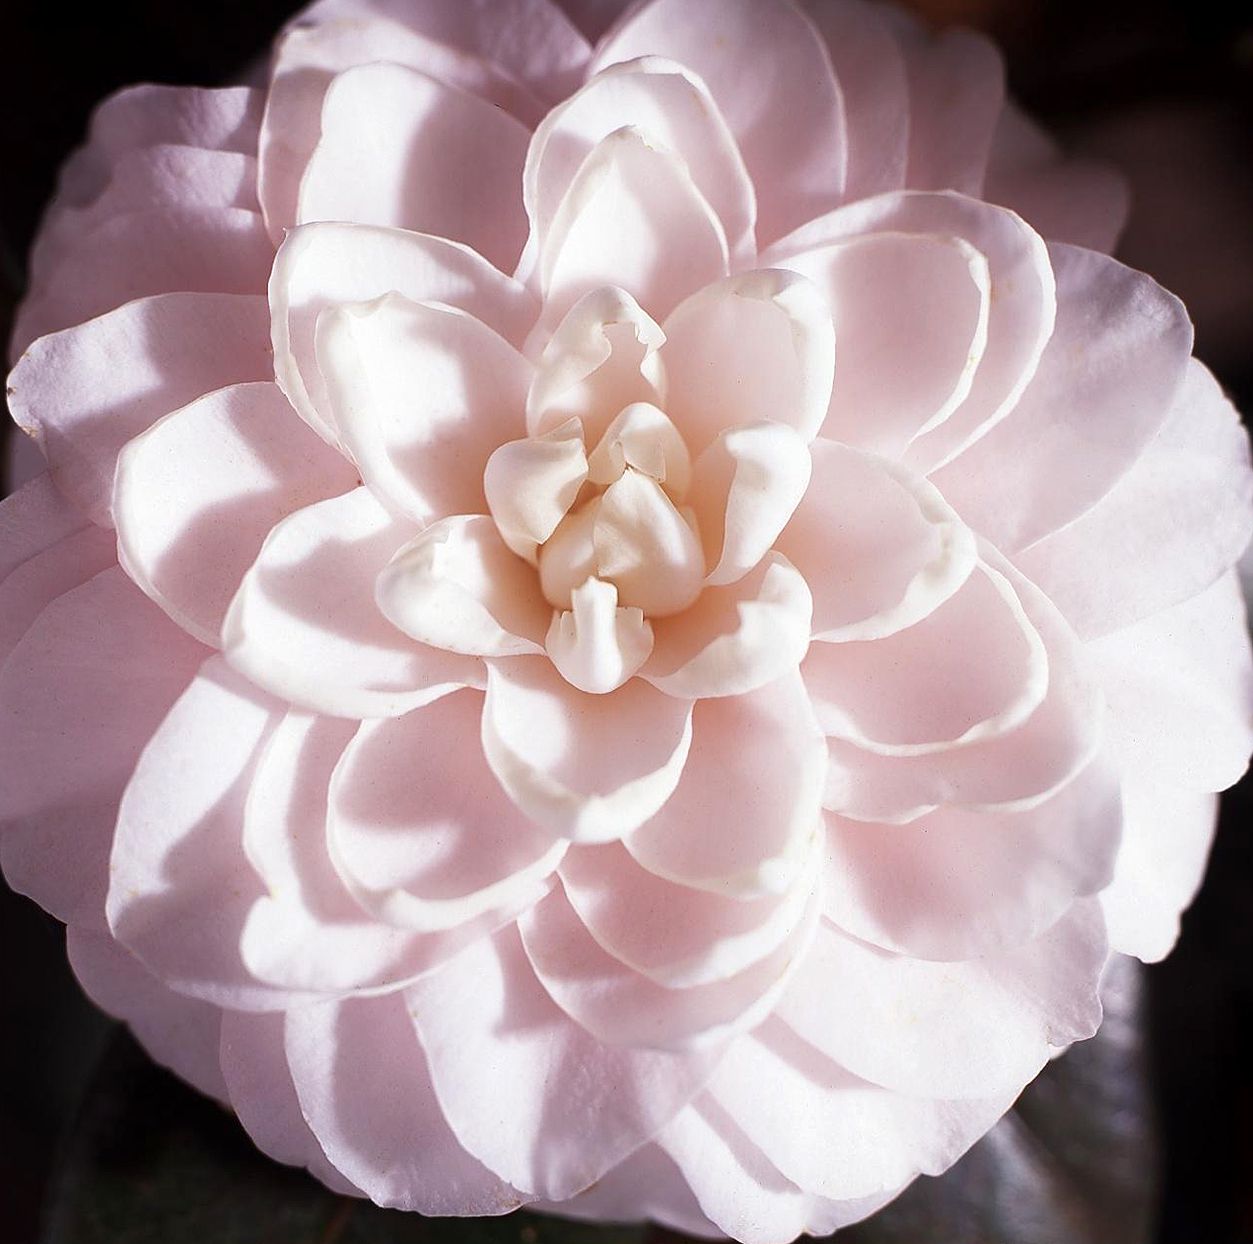 Camellia japonica 'Helen's Ballerina' with white blooms